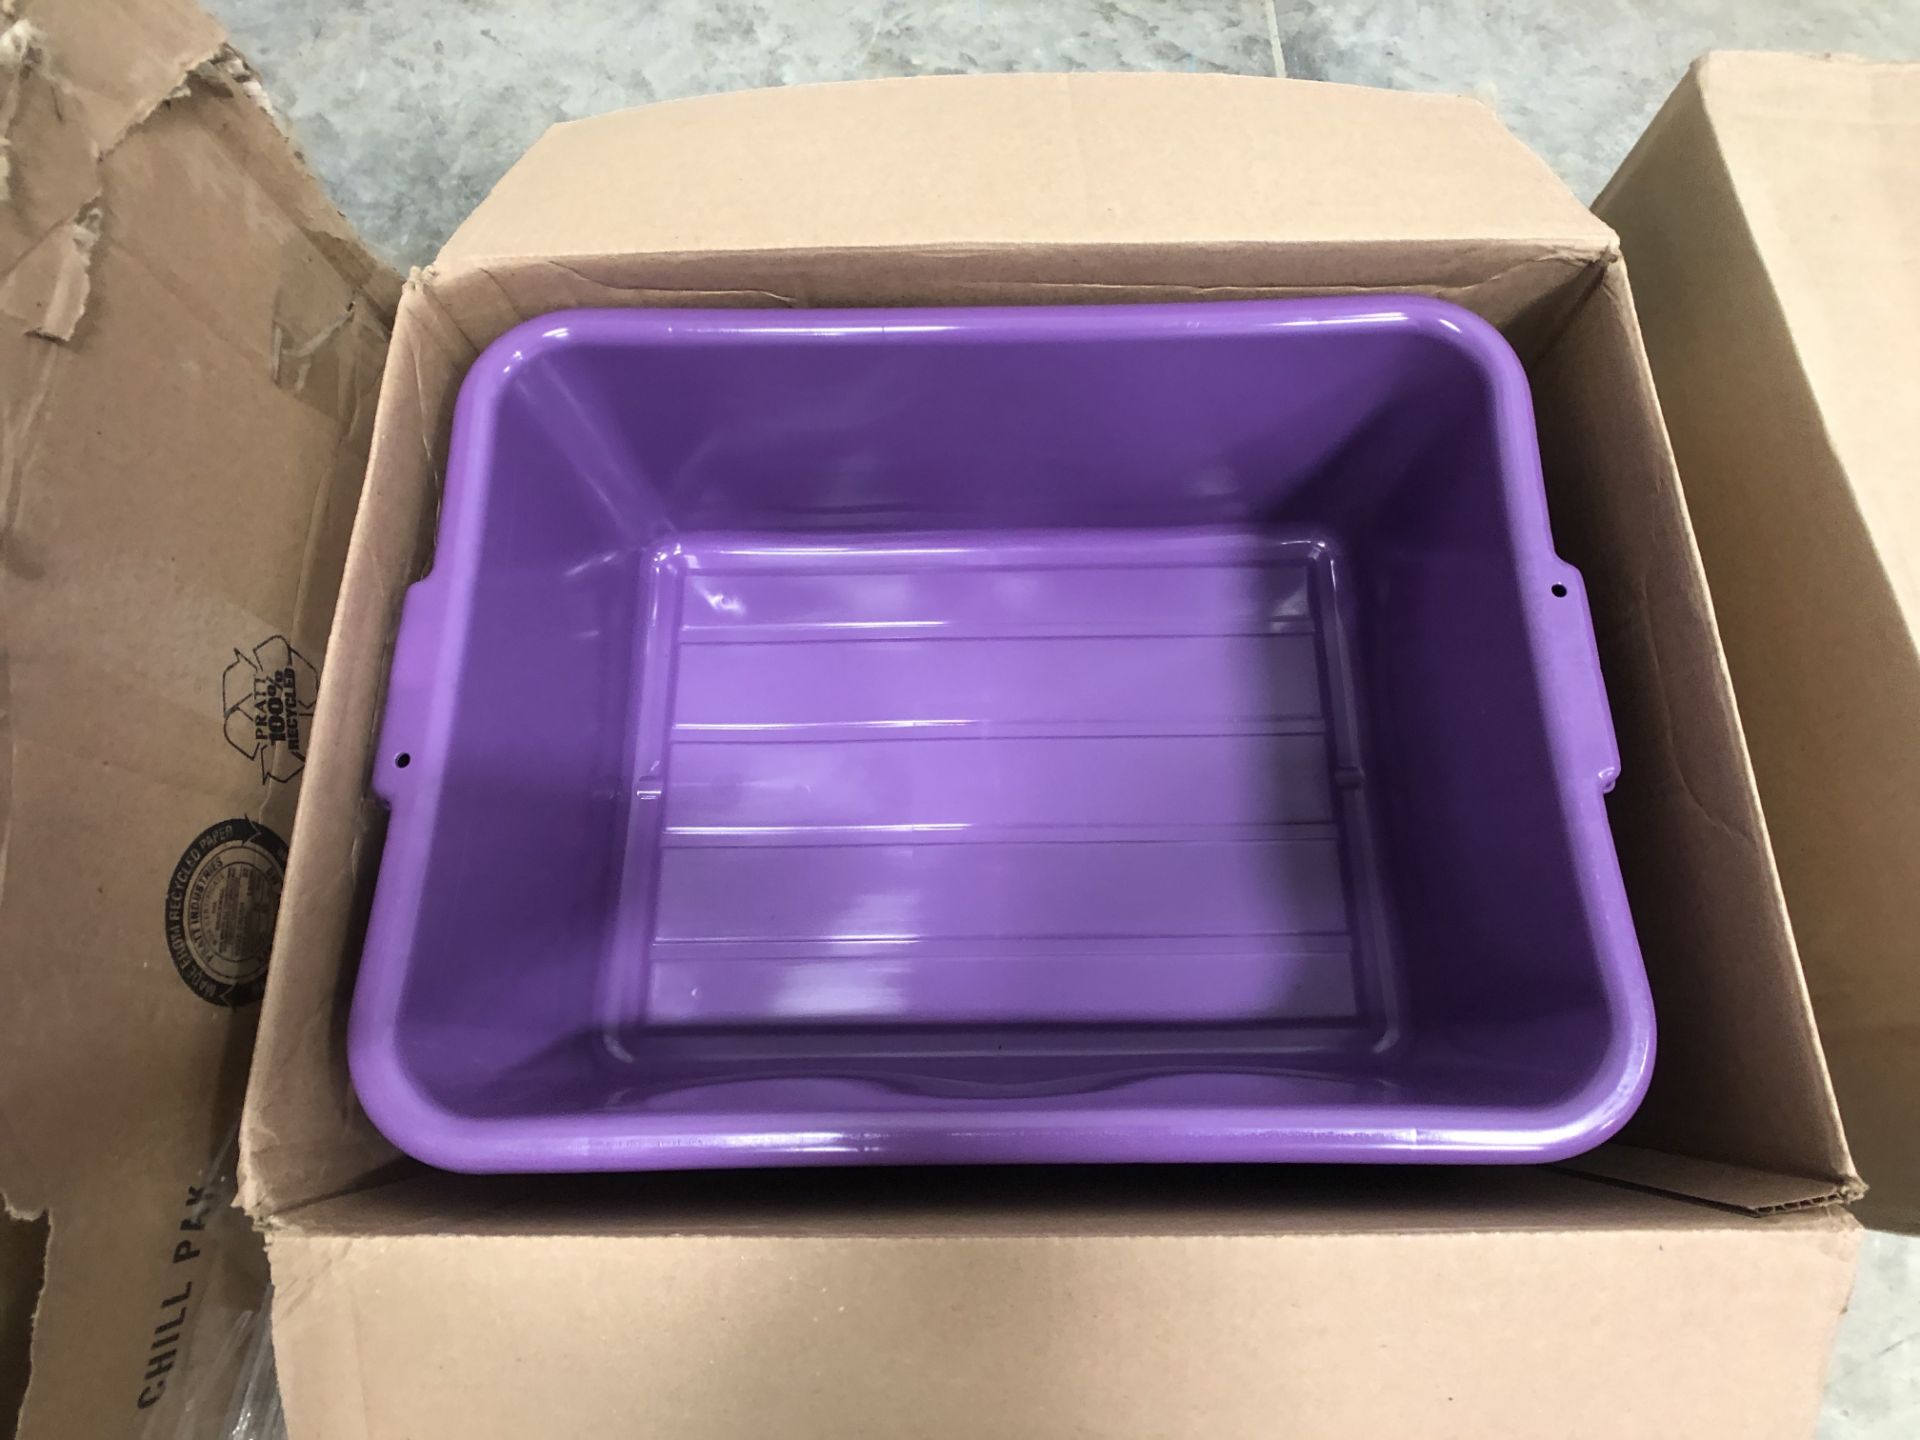 NEW IN BOX, VOLLRATH FOOD STORAGE BINS AND LIDS, VARIOUS SIZES AND COLORS - Image 2 of 5